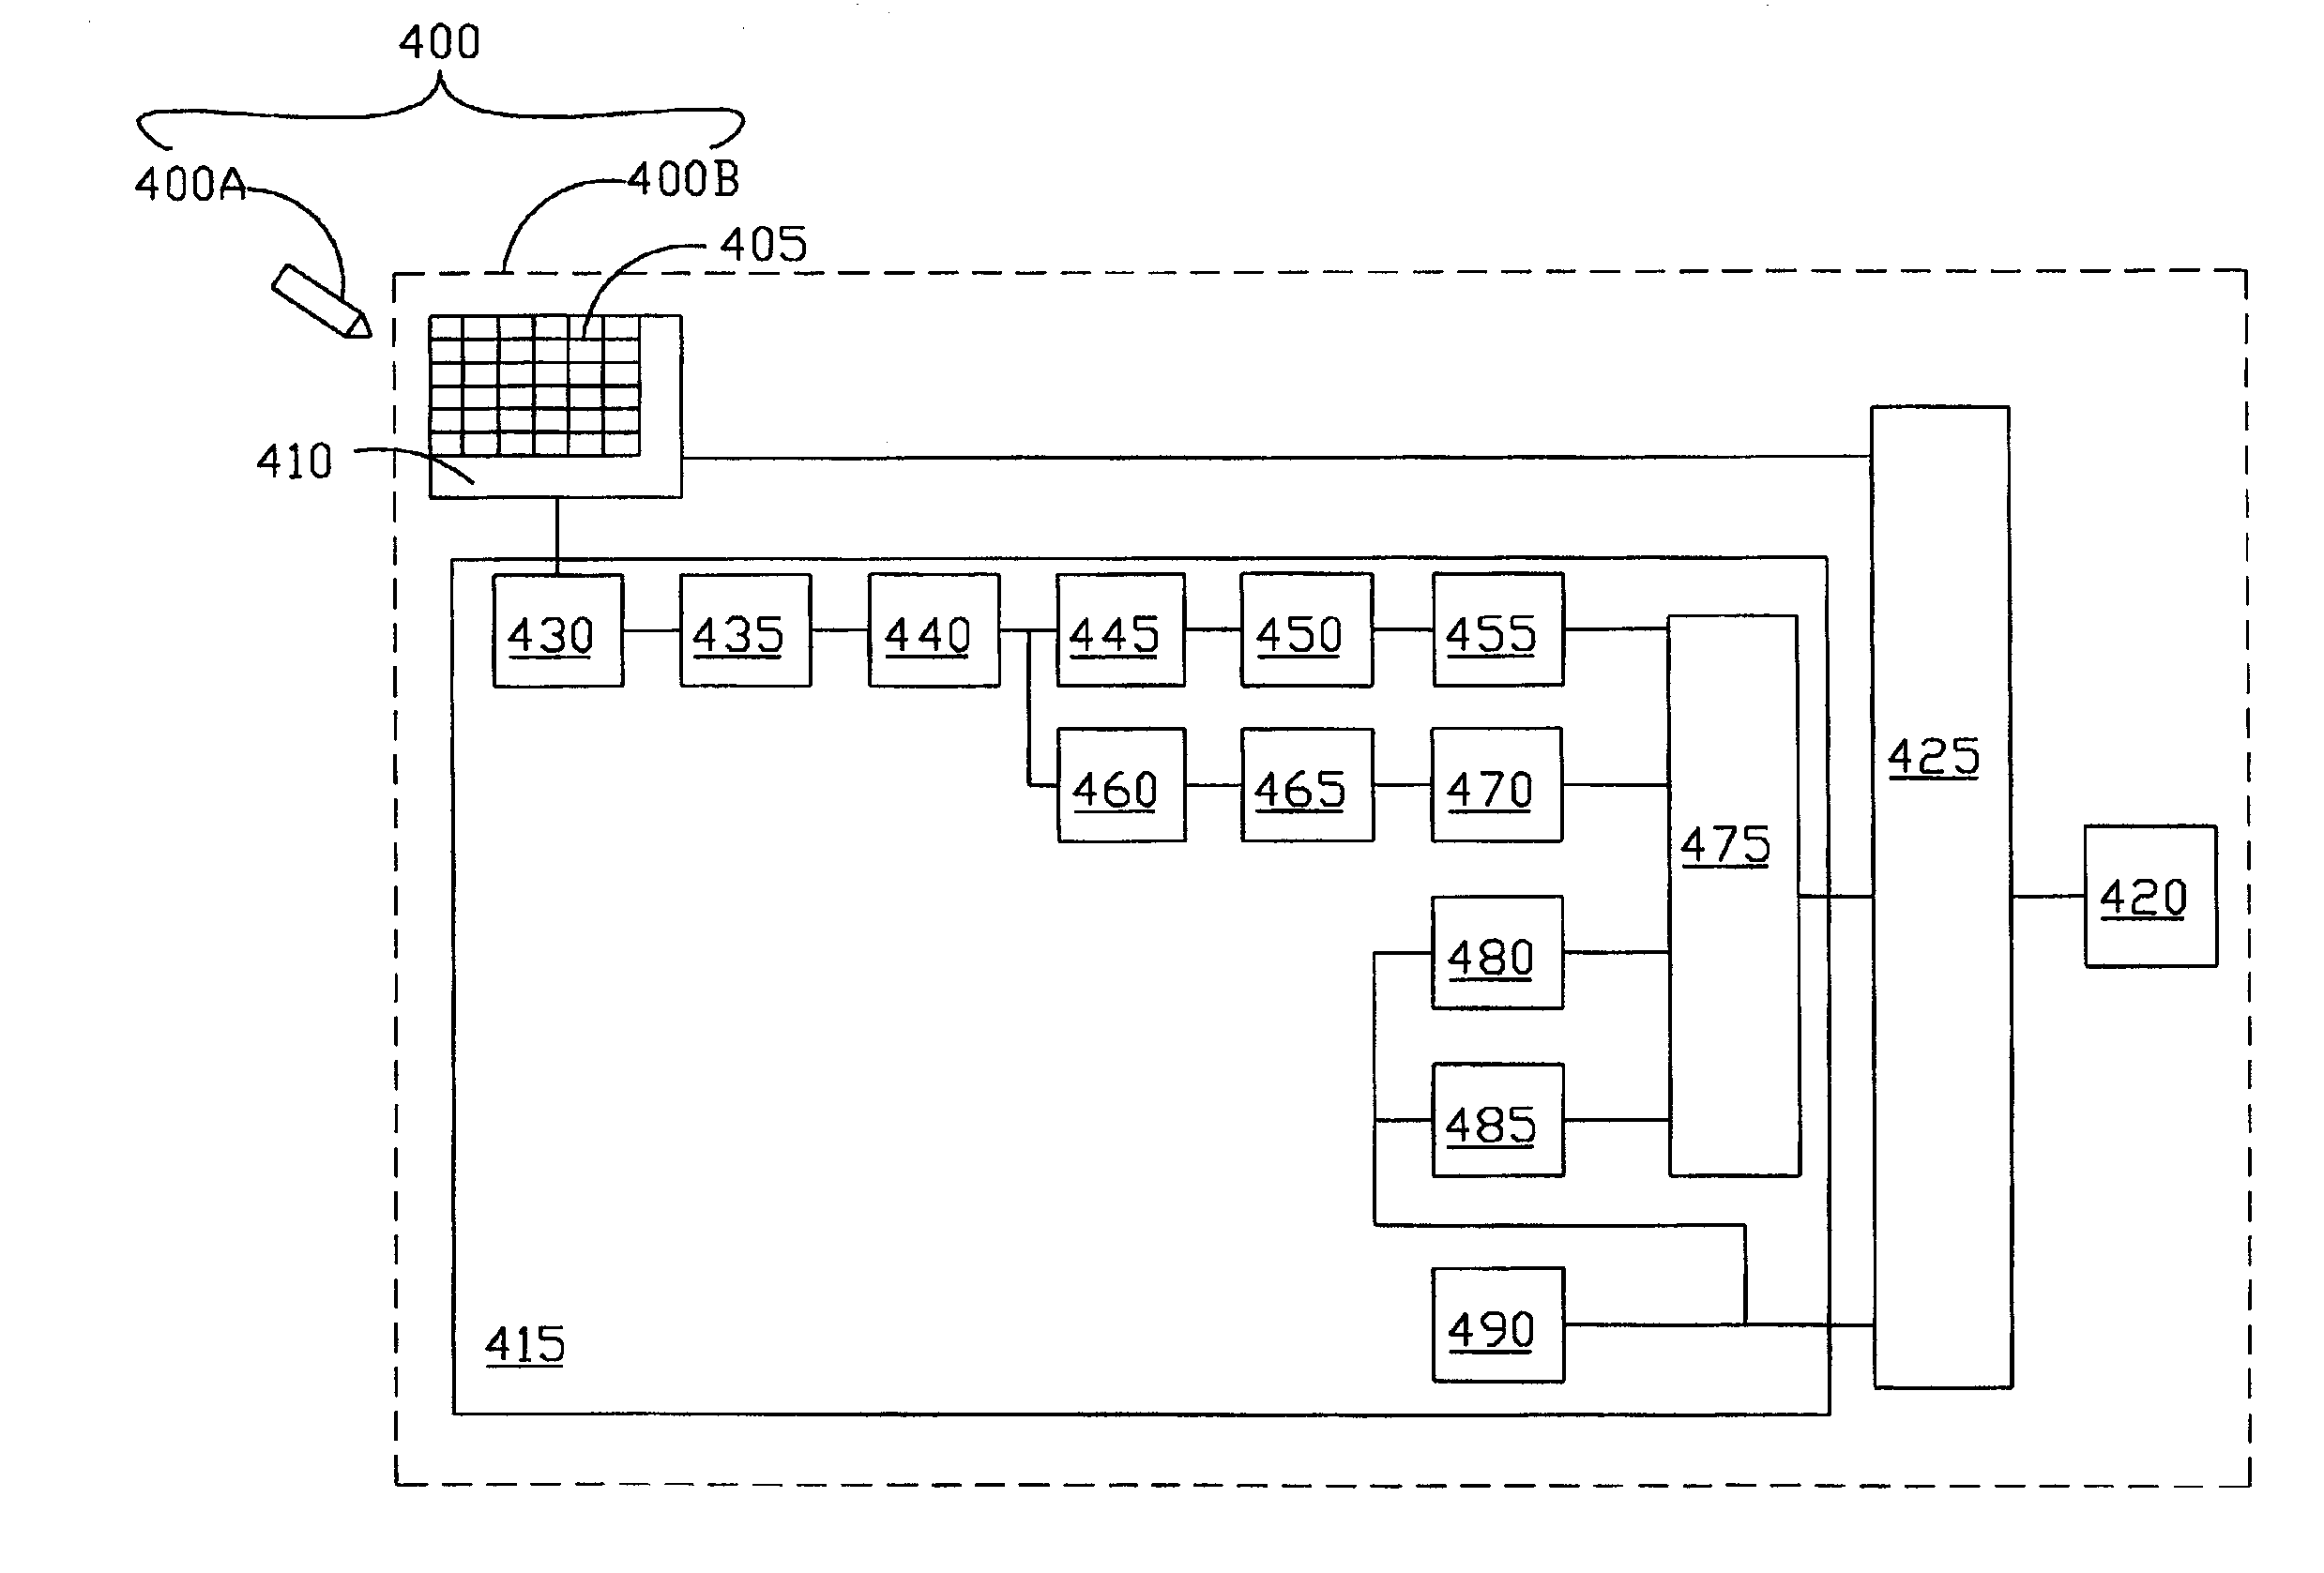 Application specific integrated circuit (ASIC) of the electromagnetic-induction system